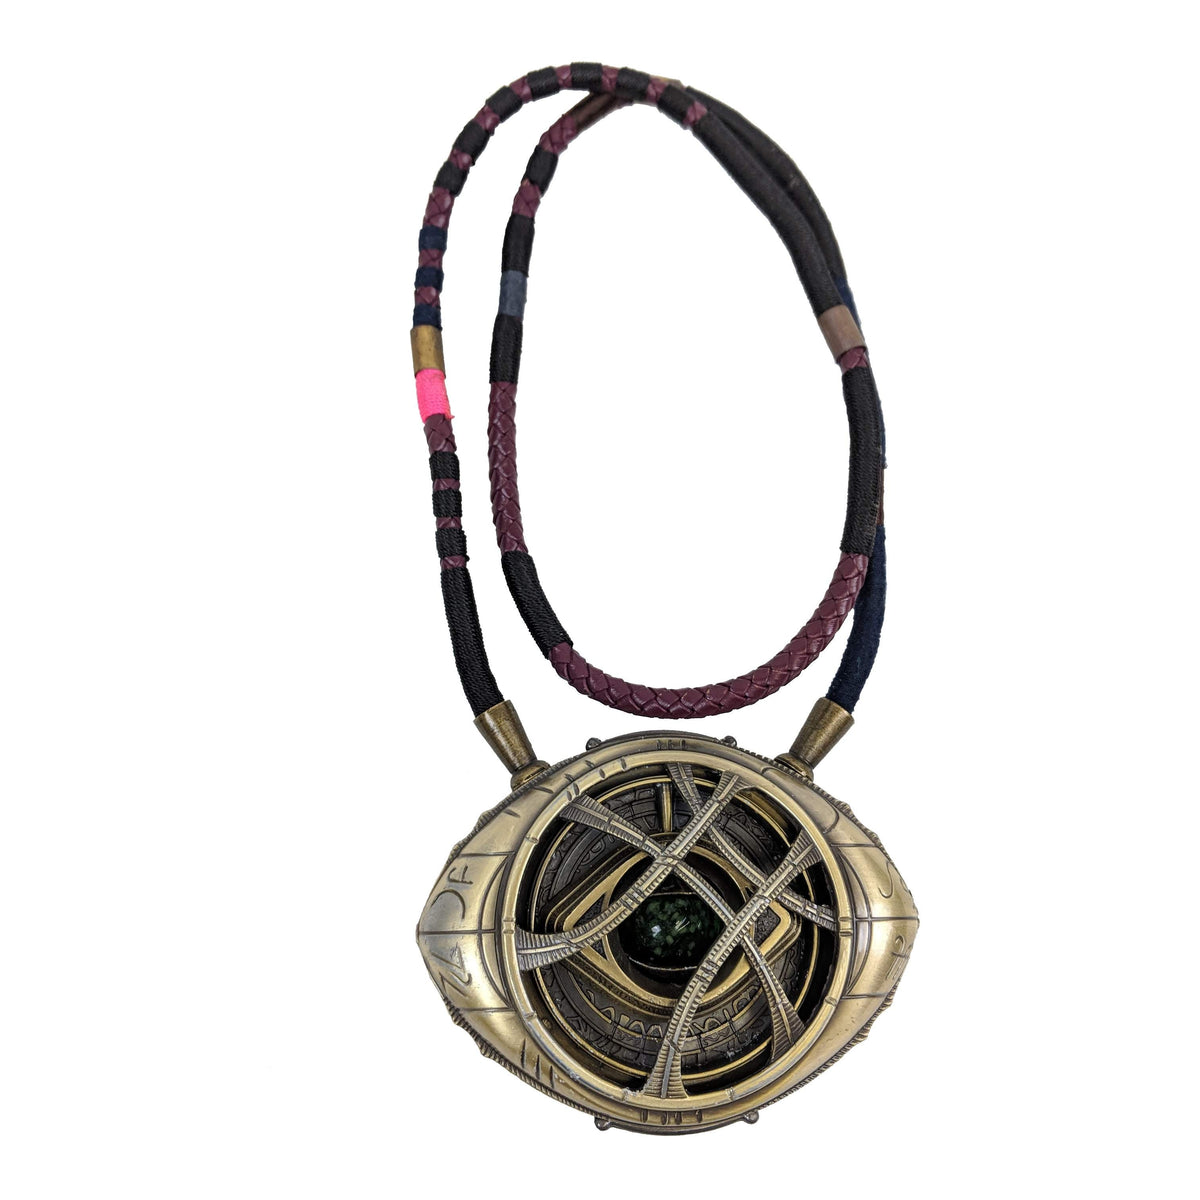 Amazon.com: Marvel Studios Doctor Strange in The Multiverse of Madness  Brass Eye of Agamotto Prop Replica Necklace